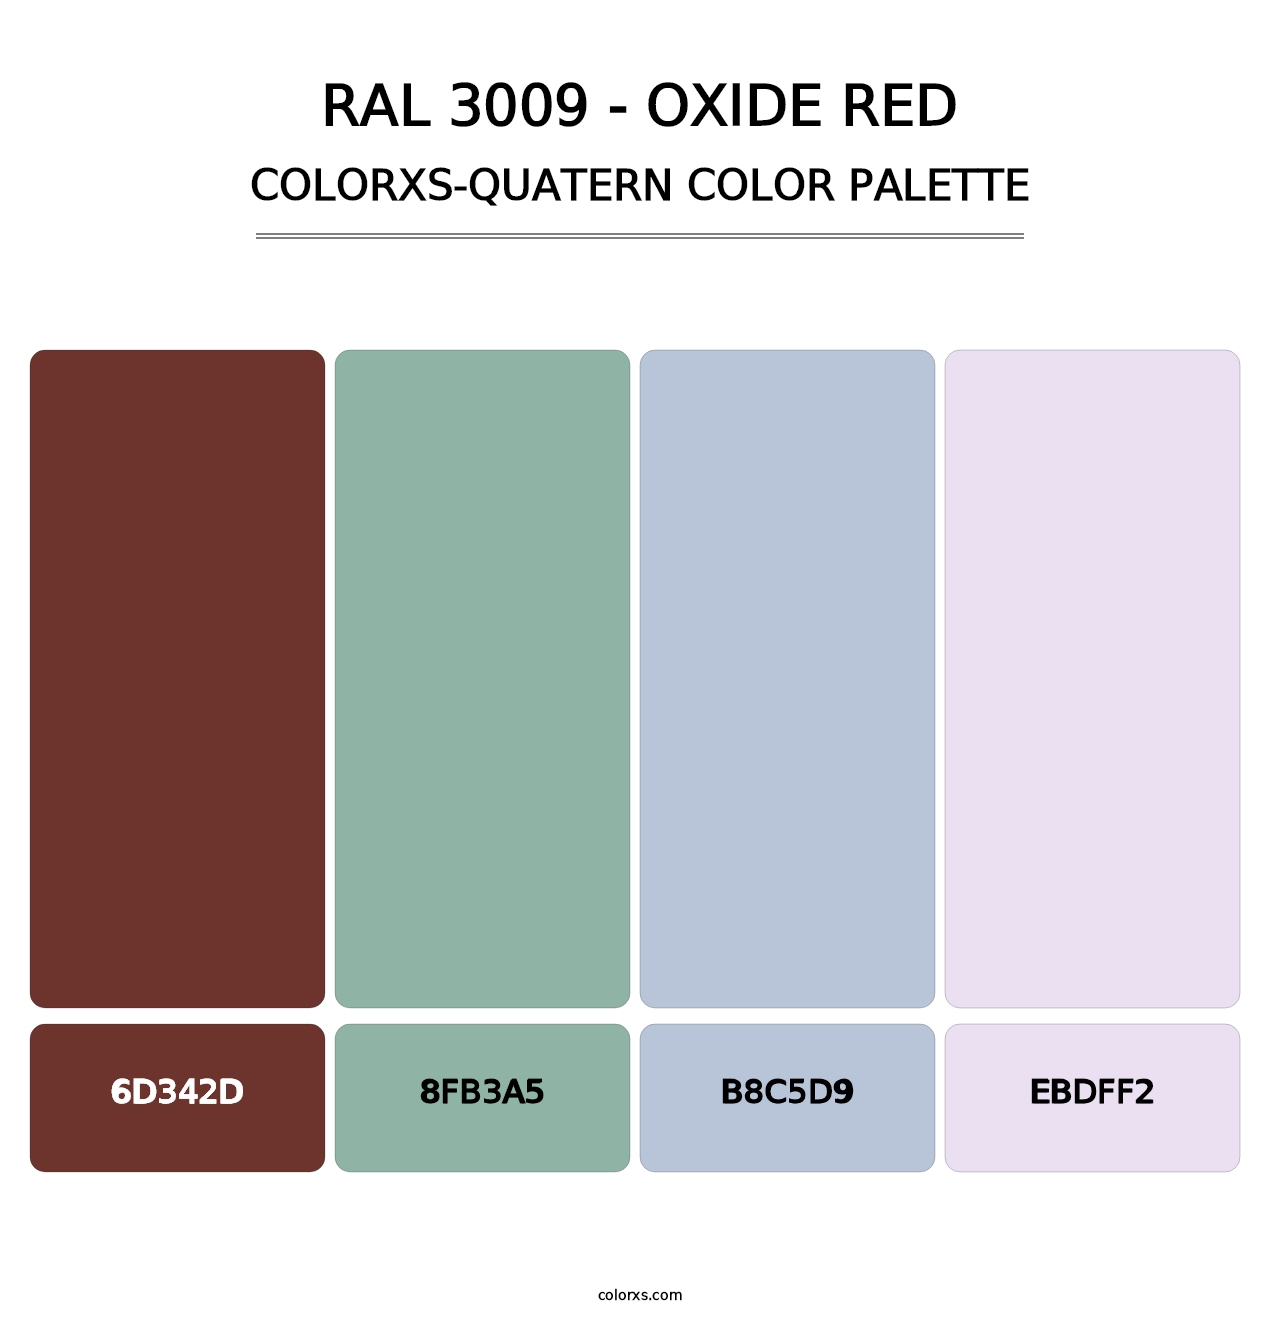 RAL 3009 - Oxide Red - Colorxs Quatern Palette